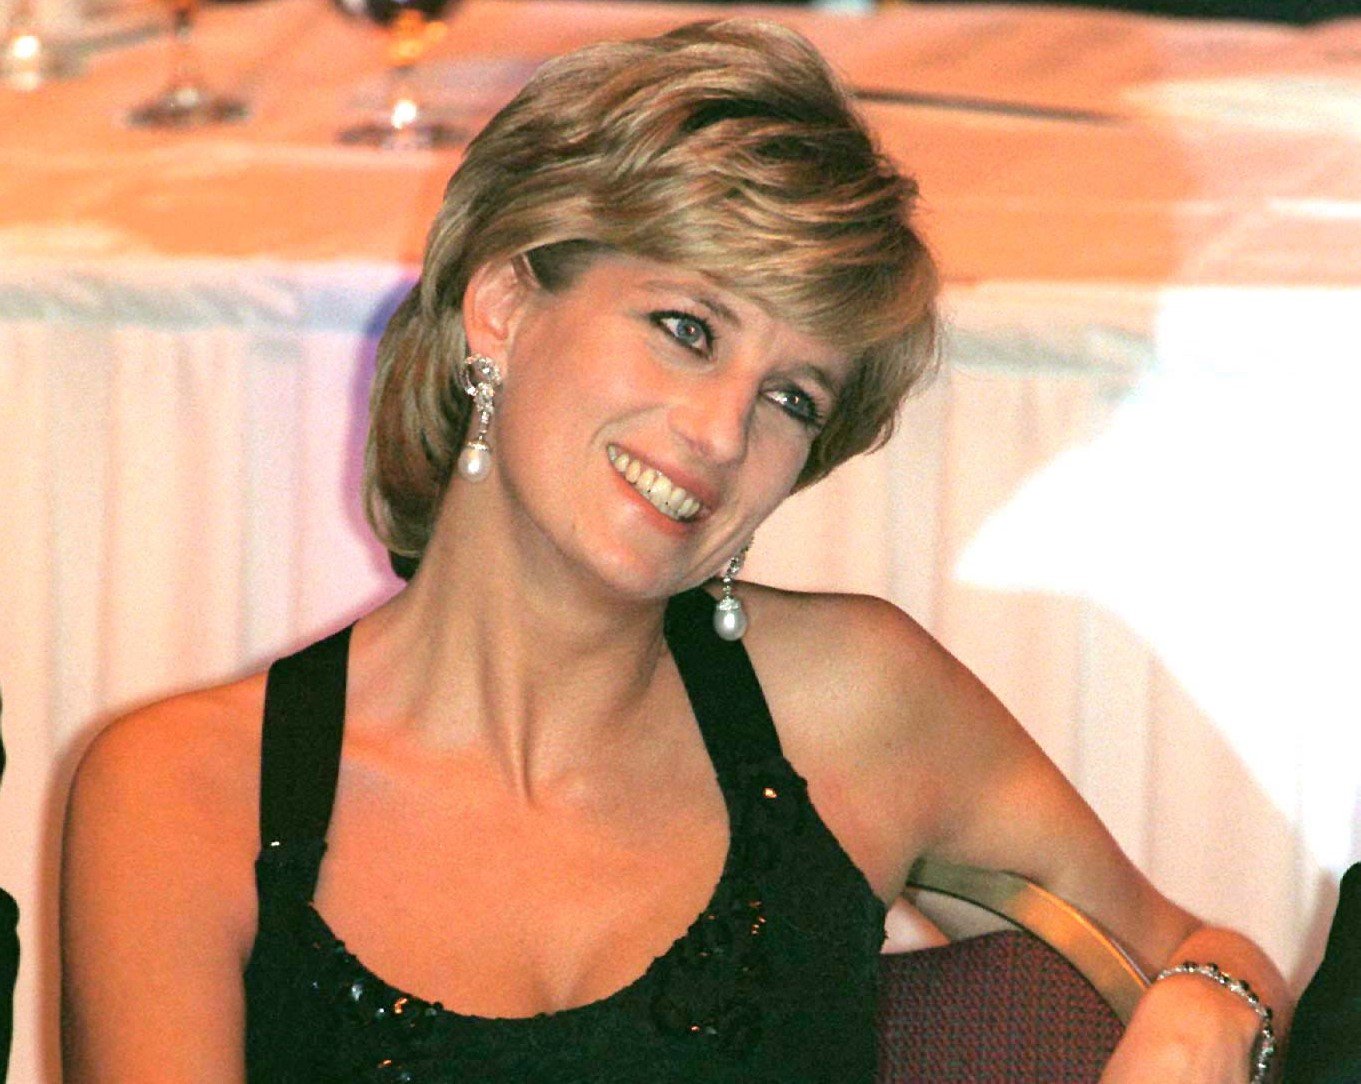 Princess Diana wearing par earrings and a black dress at event to receive an award as Humanitarian of the Year in 1996